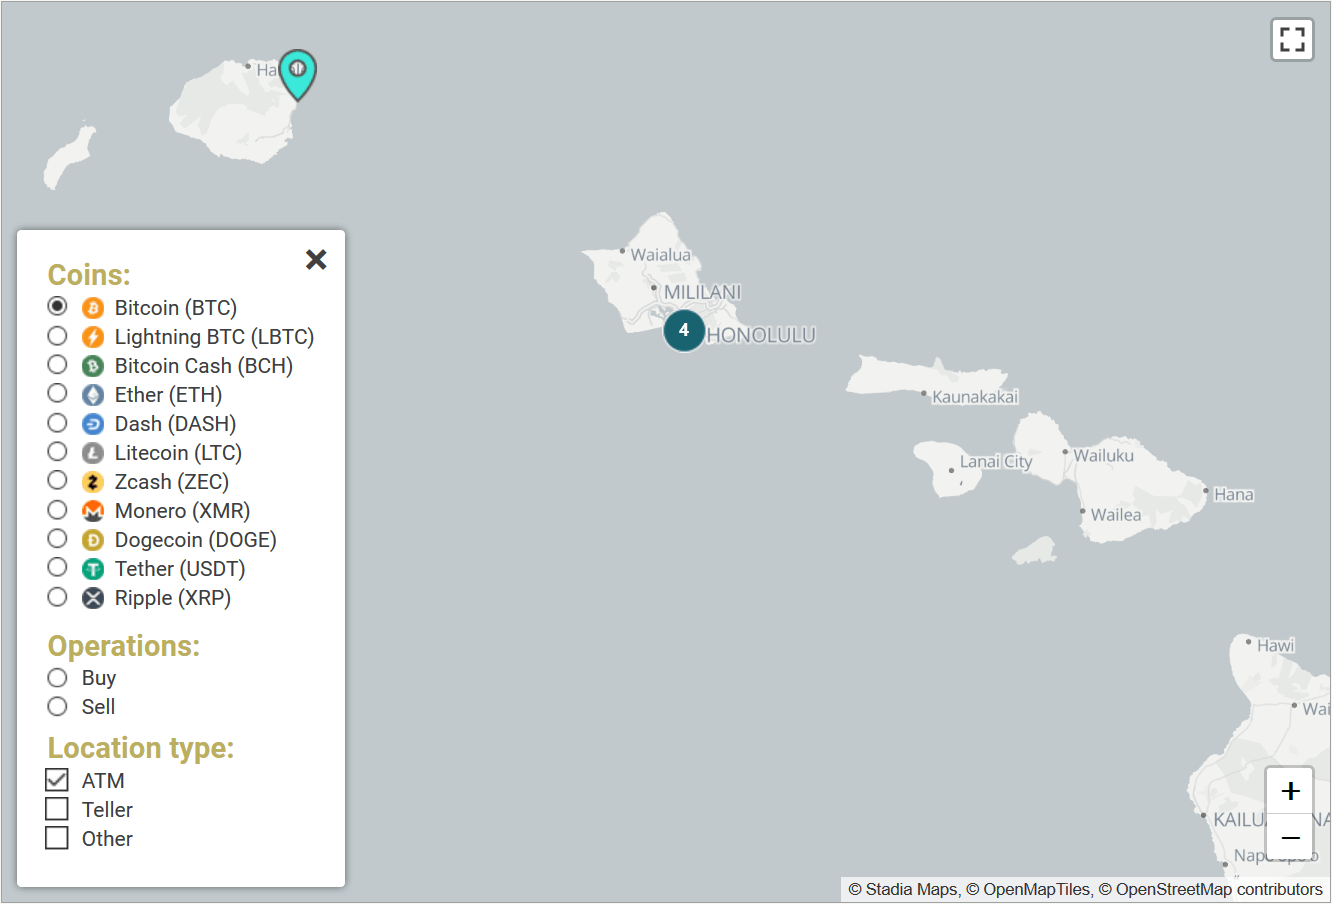 crypto exchange for hawaii